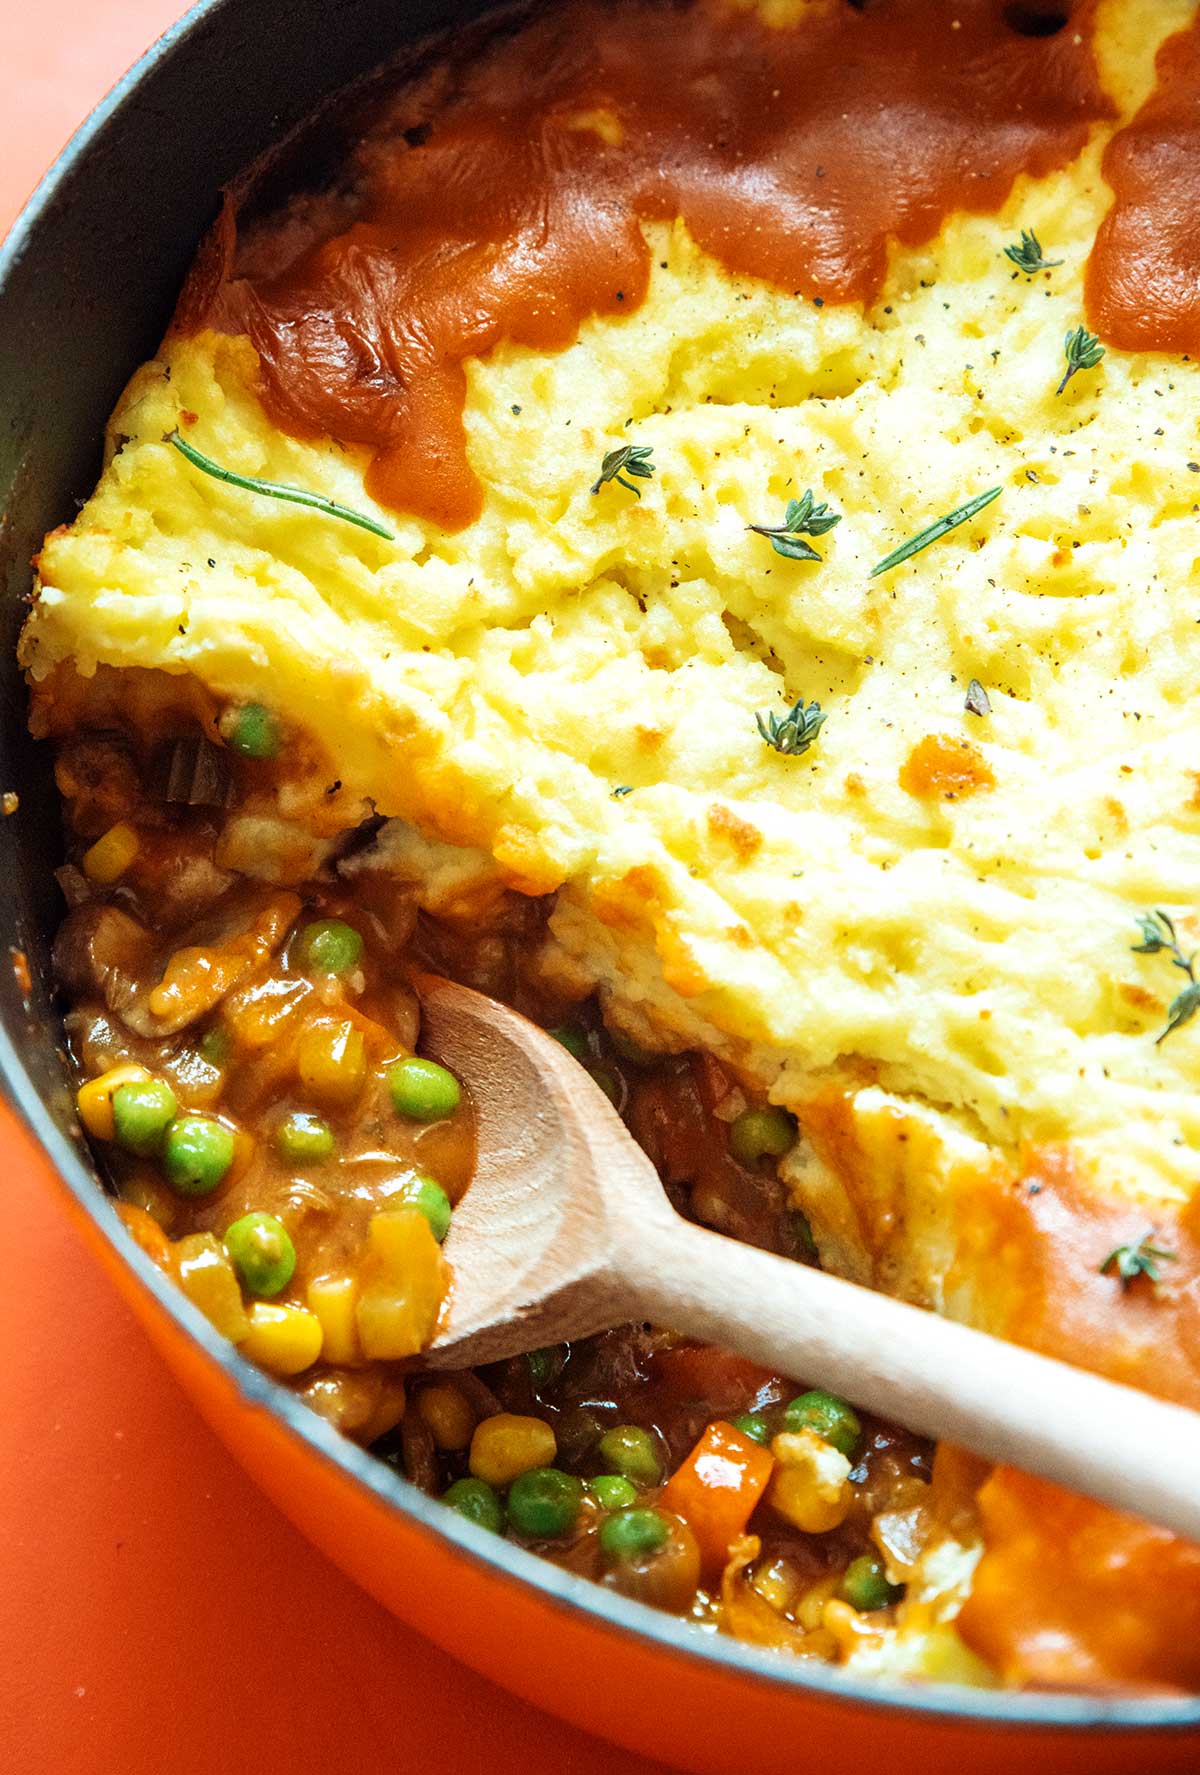 A close-up view of a wooden spoon in a pot filled with freshly cooked vegetarian shepard's pie